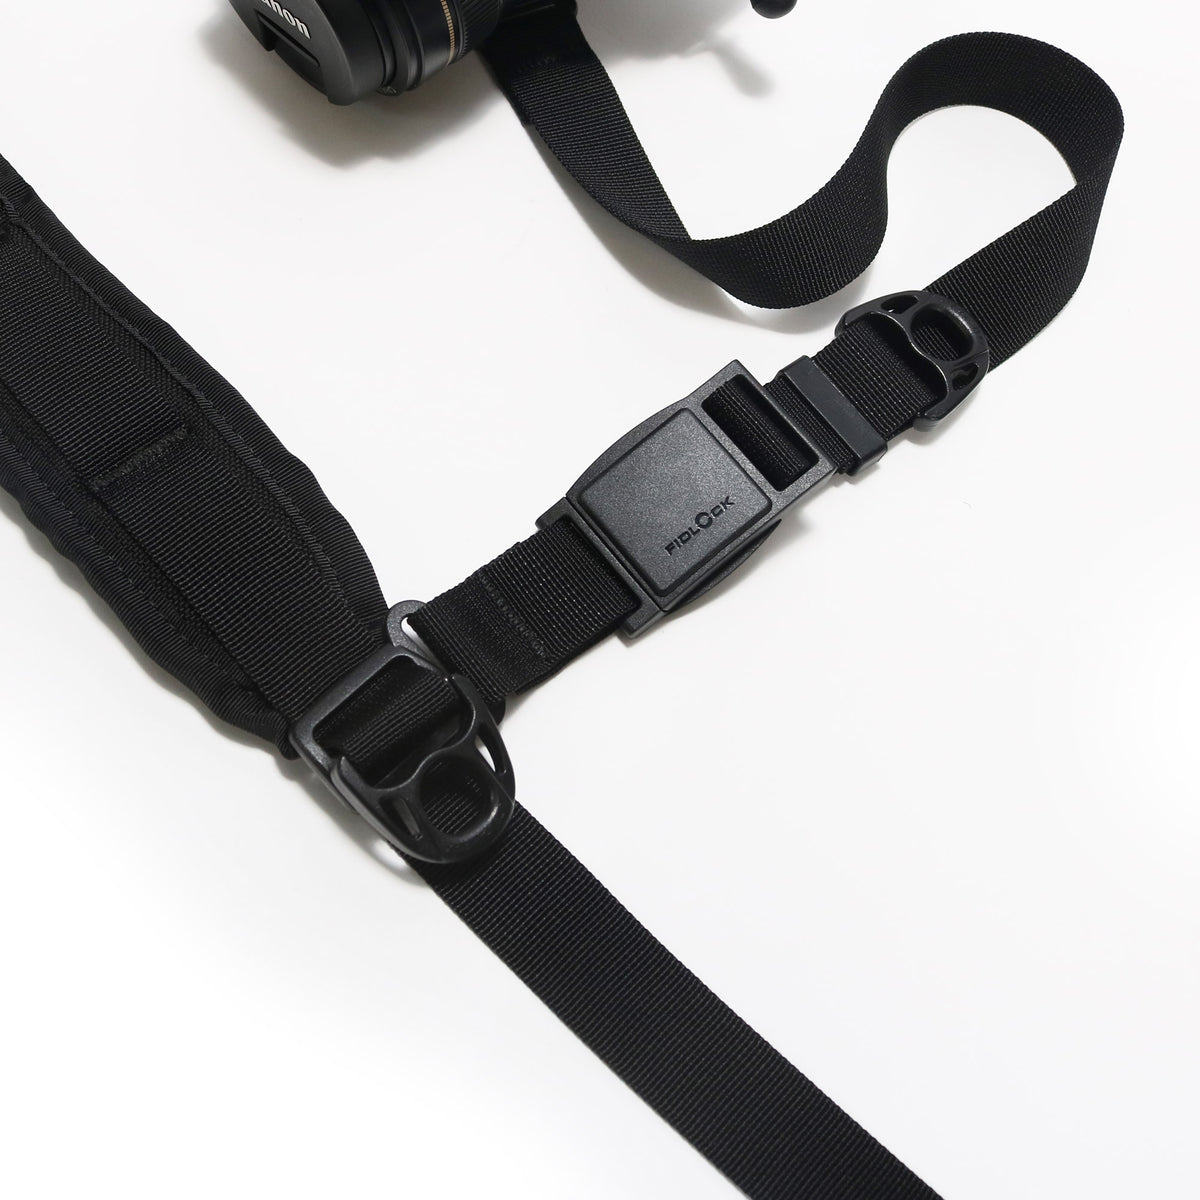 skingrowsback 3Point Cycling Camera Strap Black Made in Australia